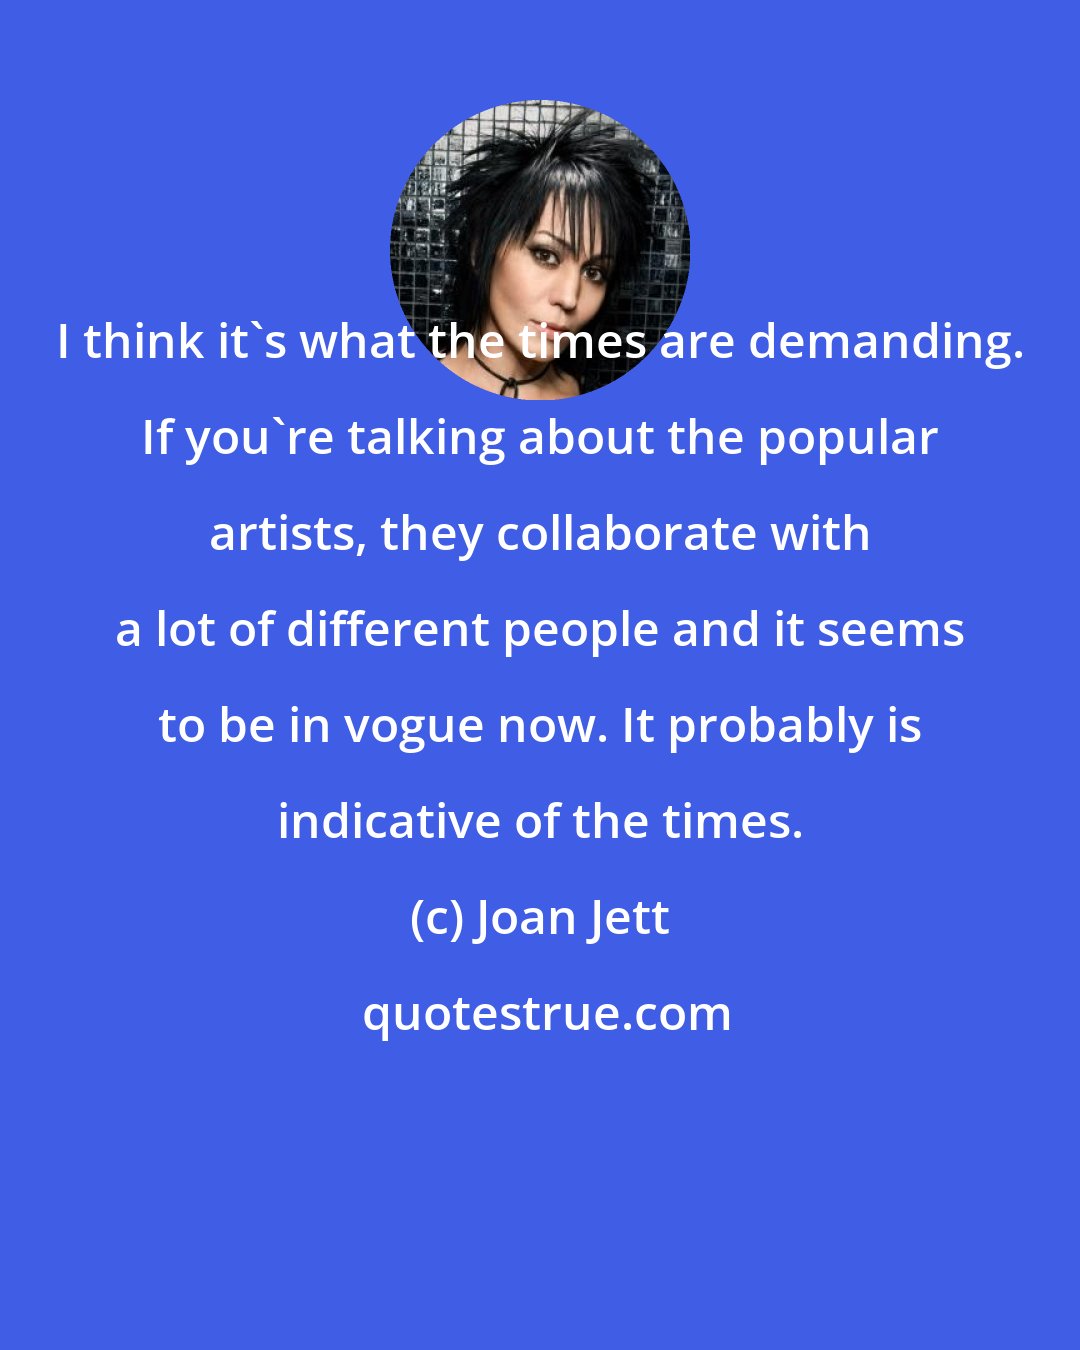 Joan Jett: I think it's what the times are demanding. If you're talking about the popular artists, they collaborate with a lot of different people and it seems to be in vogue now. It probably is indicative of the times.